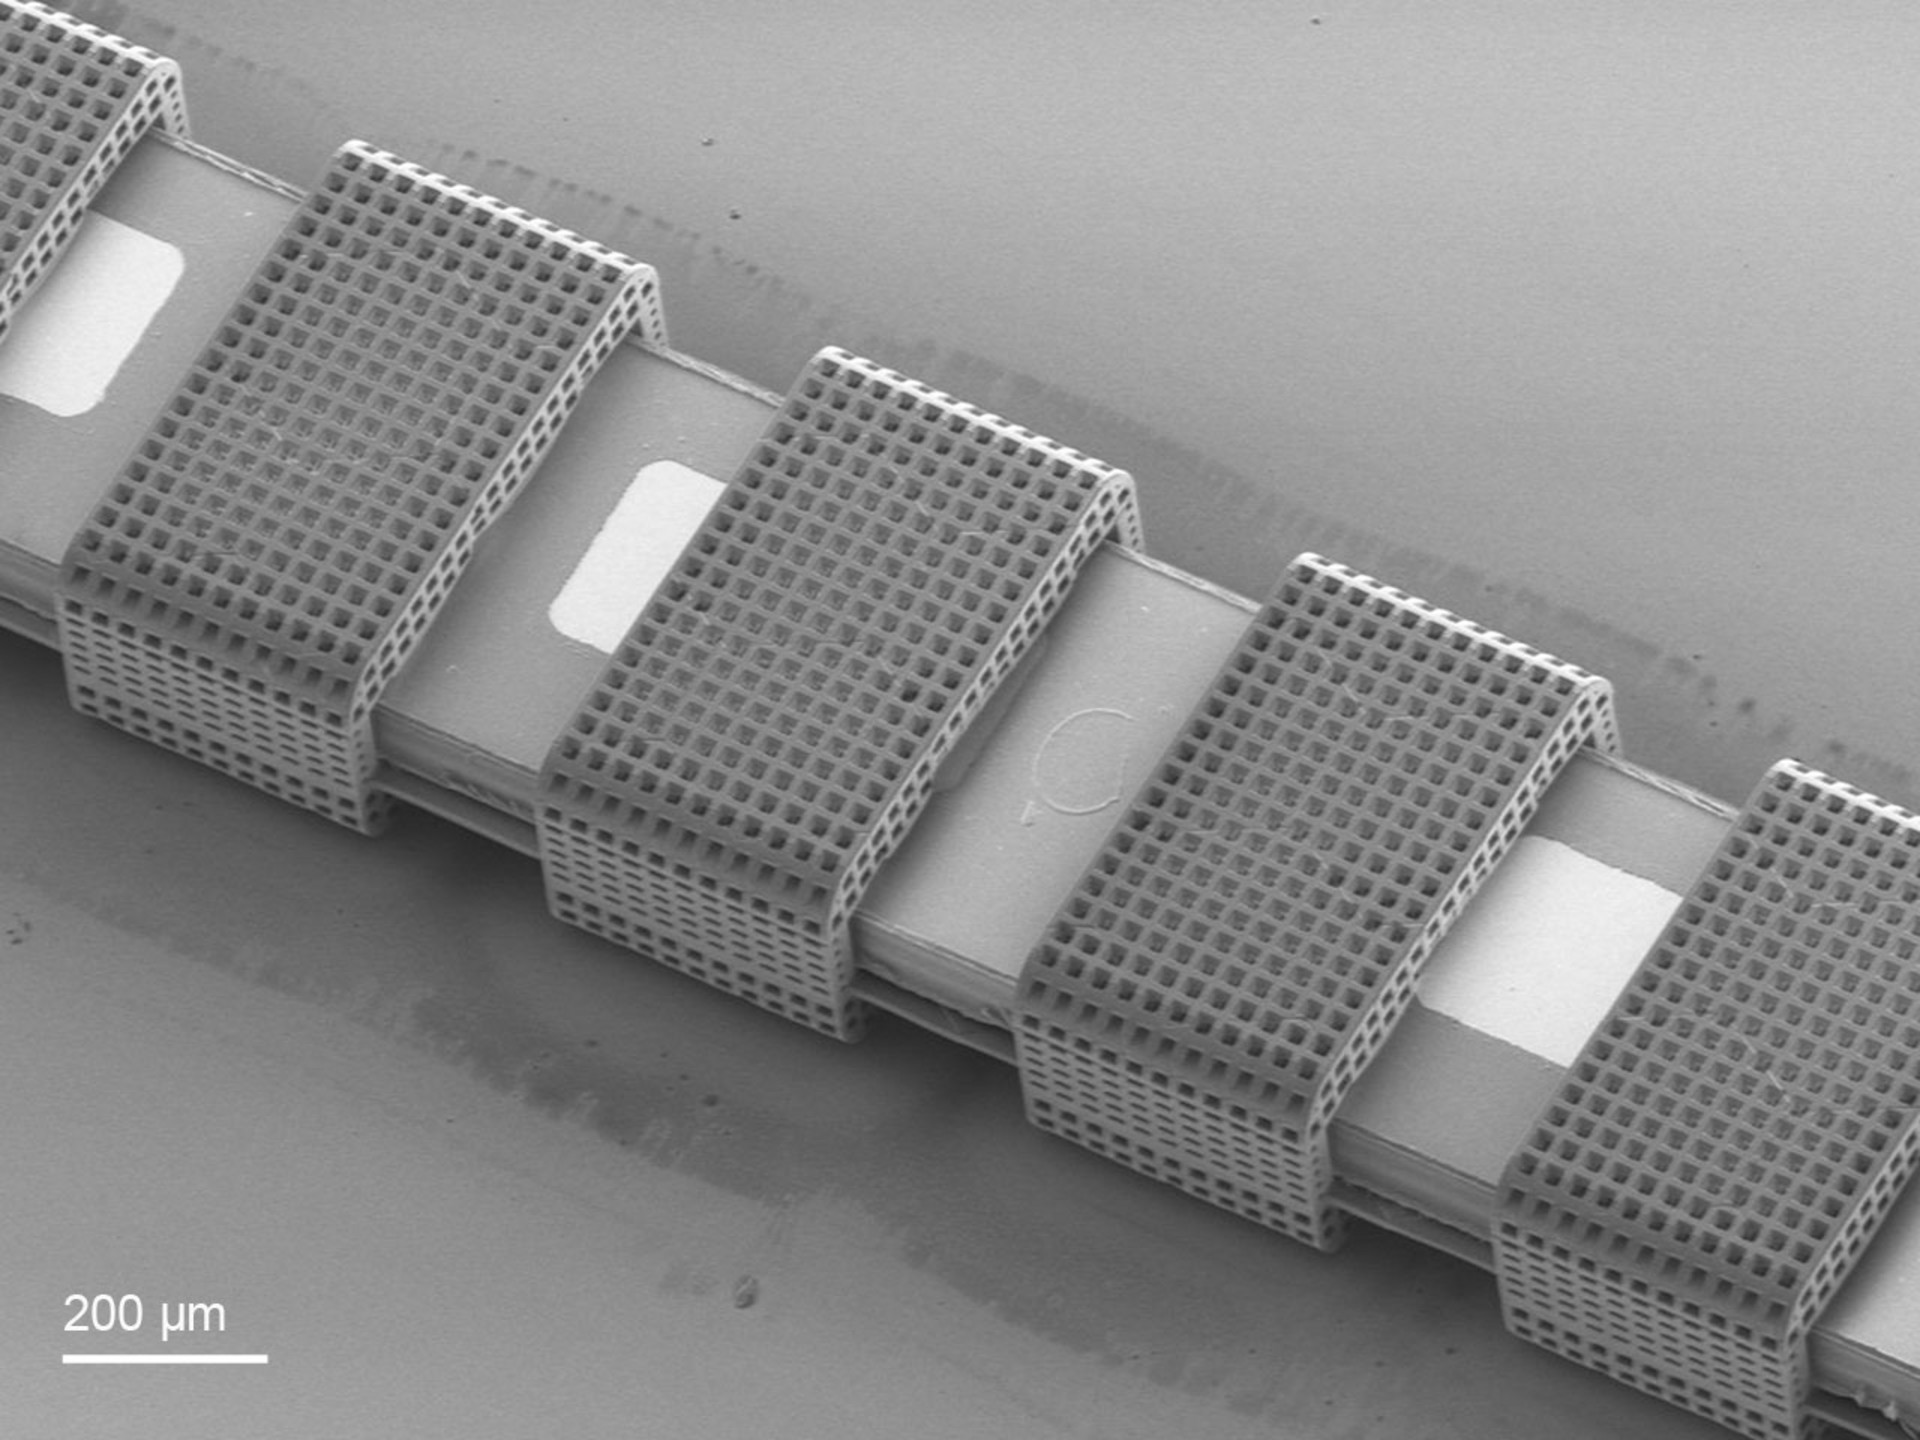 Cochlear implant consisting of 3D-printed microscaffolds